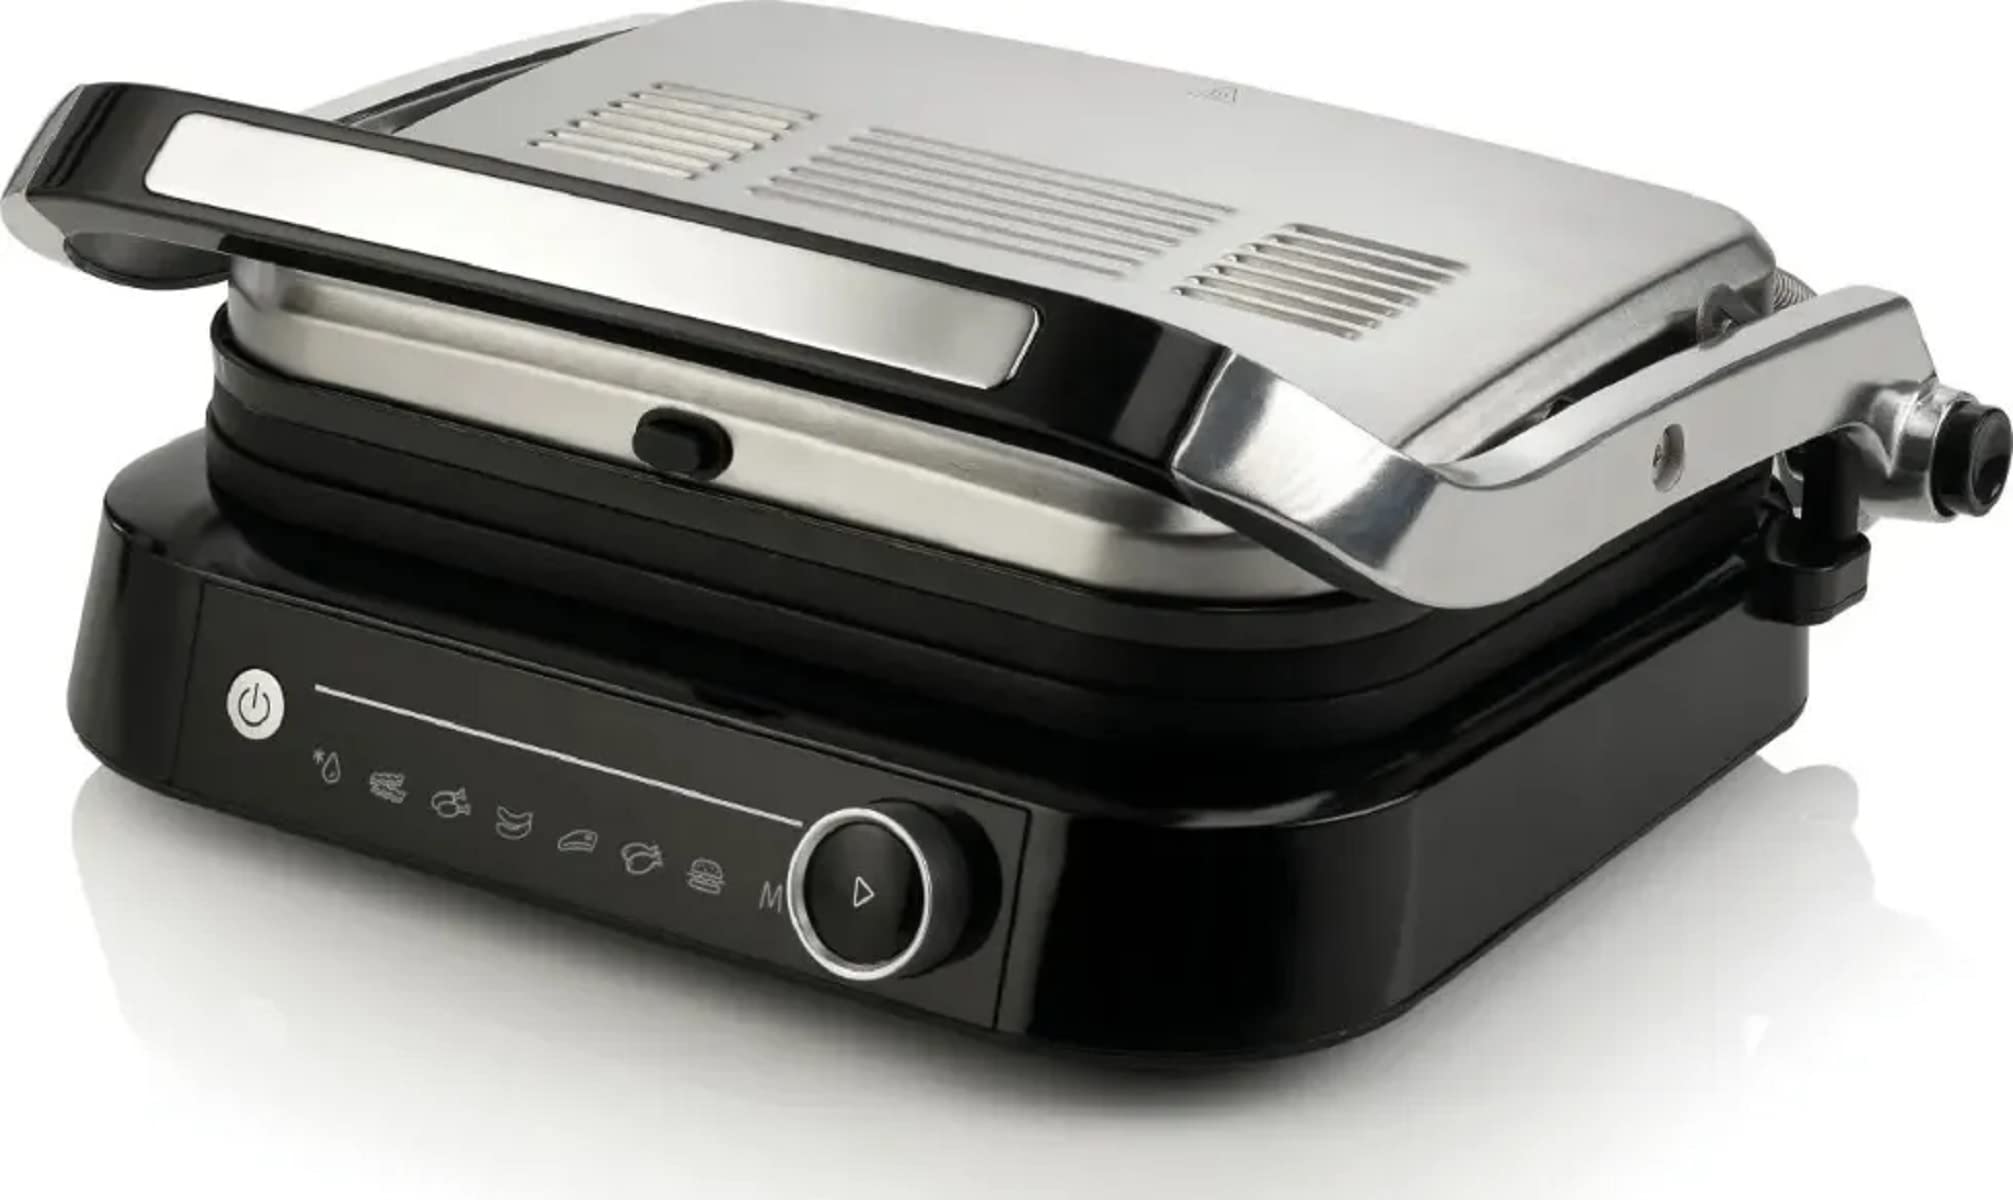 SMART CONTACT GRILL HCG2100S